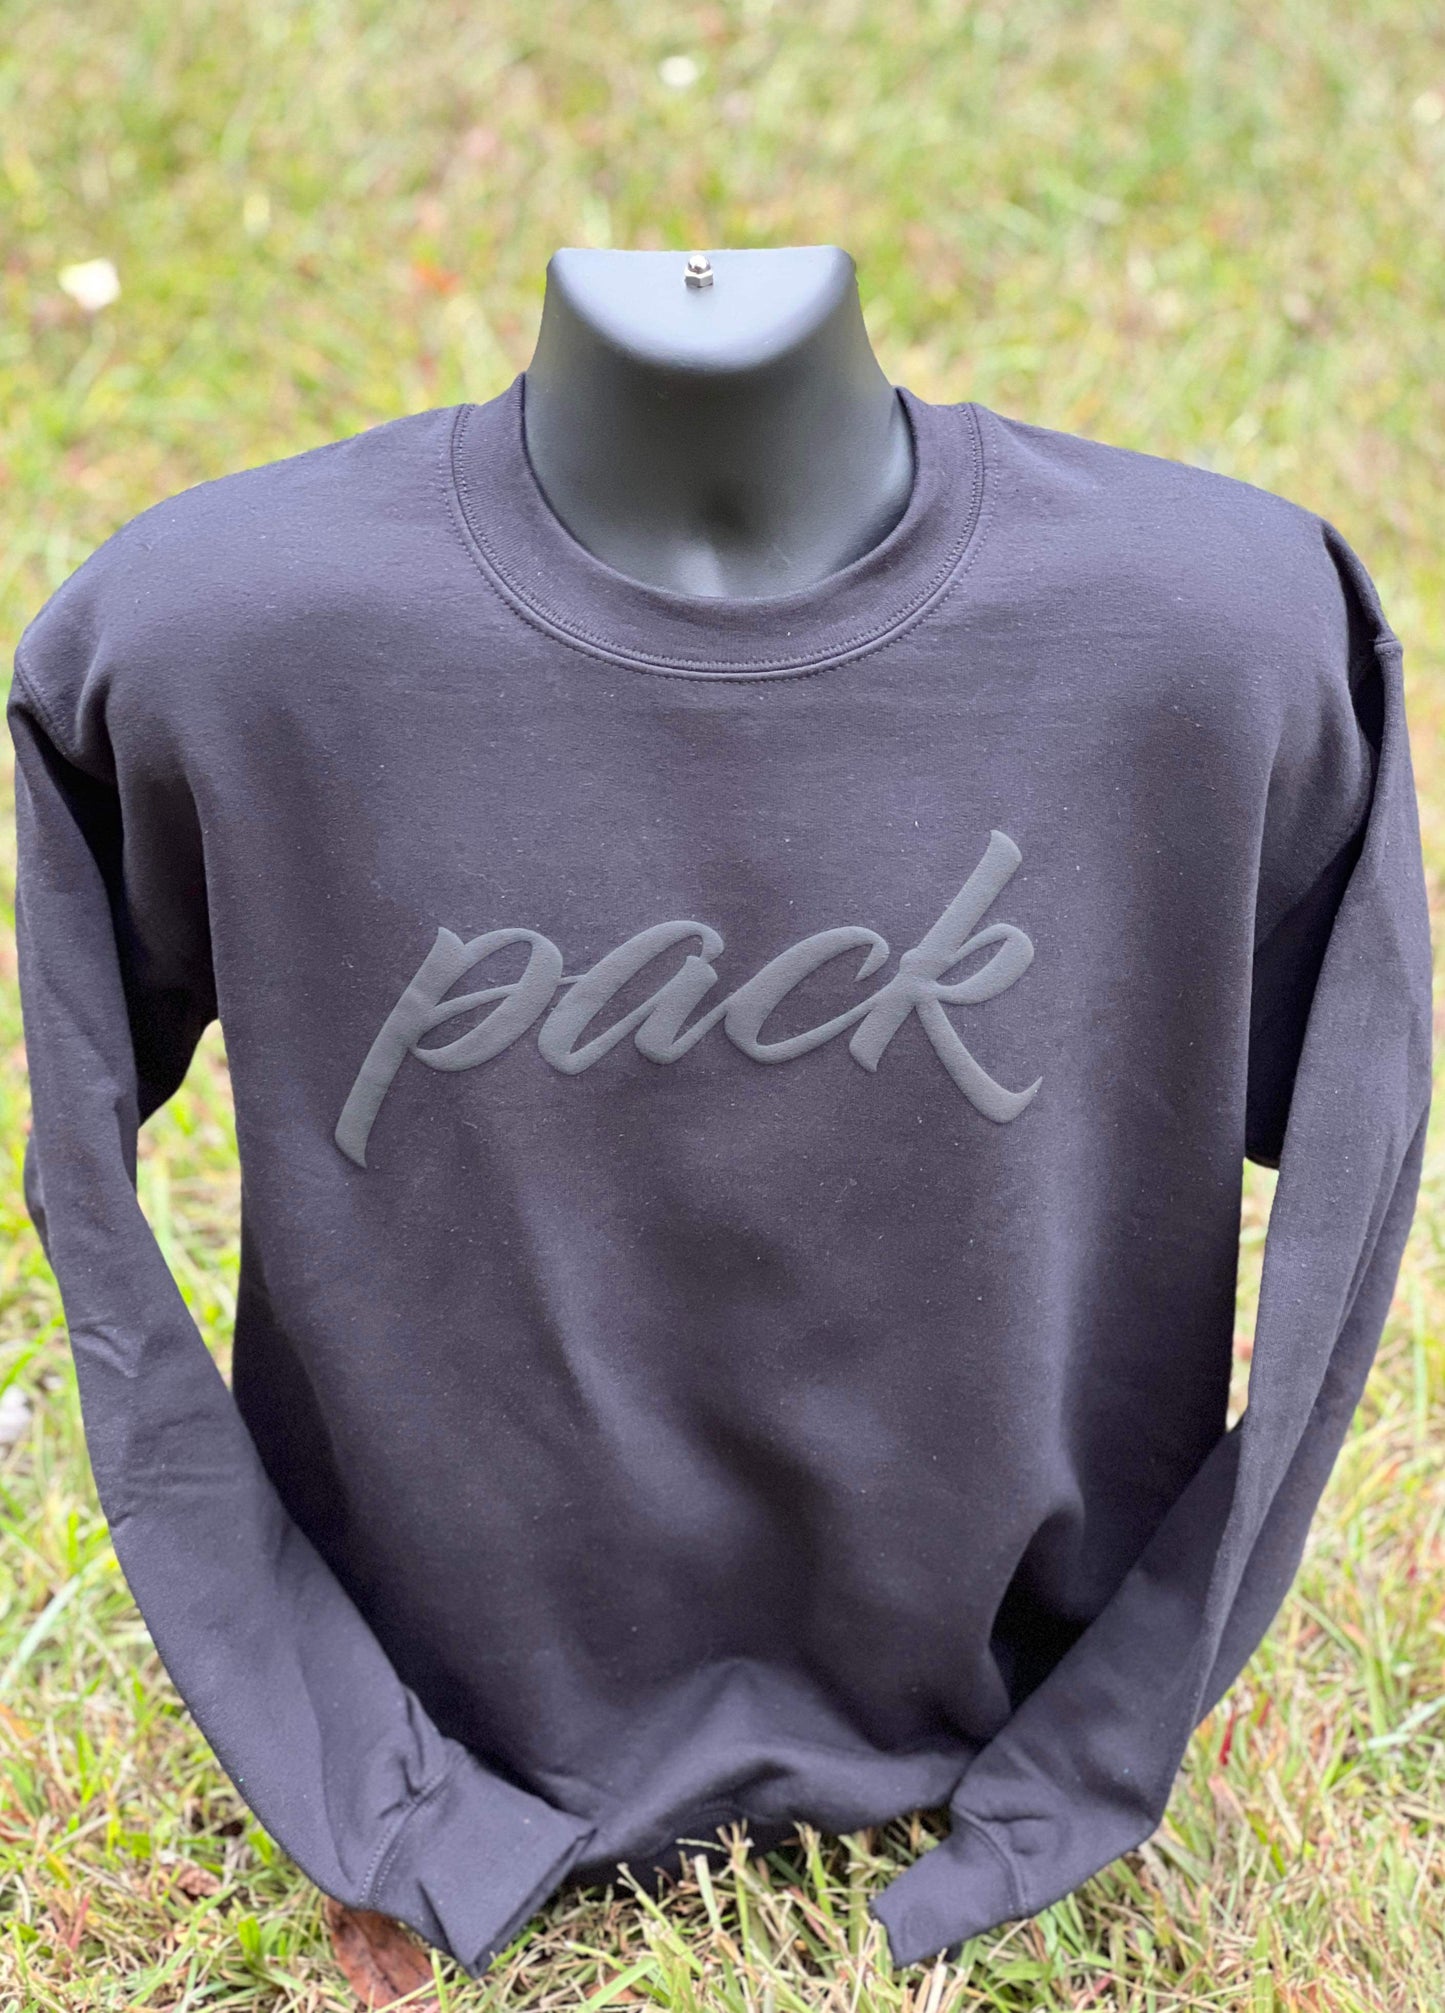 **LIMITED EDITION** PACK Blackout Puff Sweatshirt